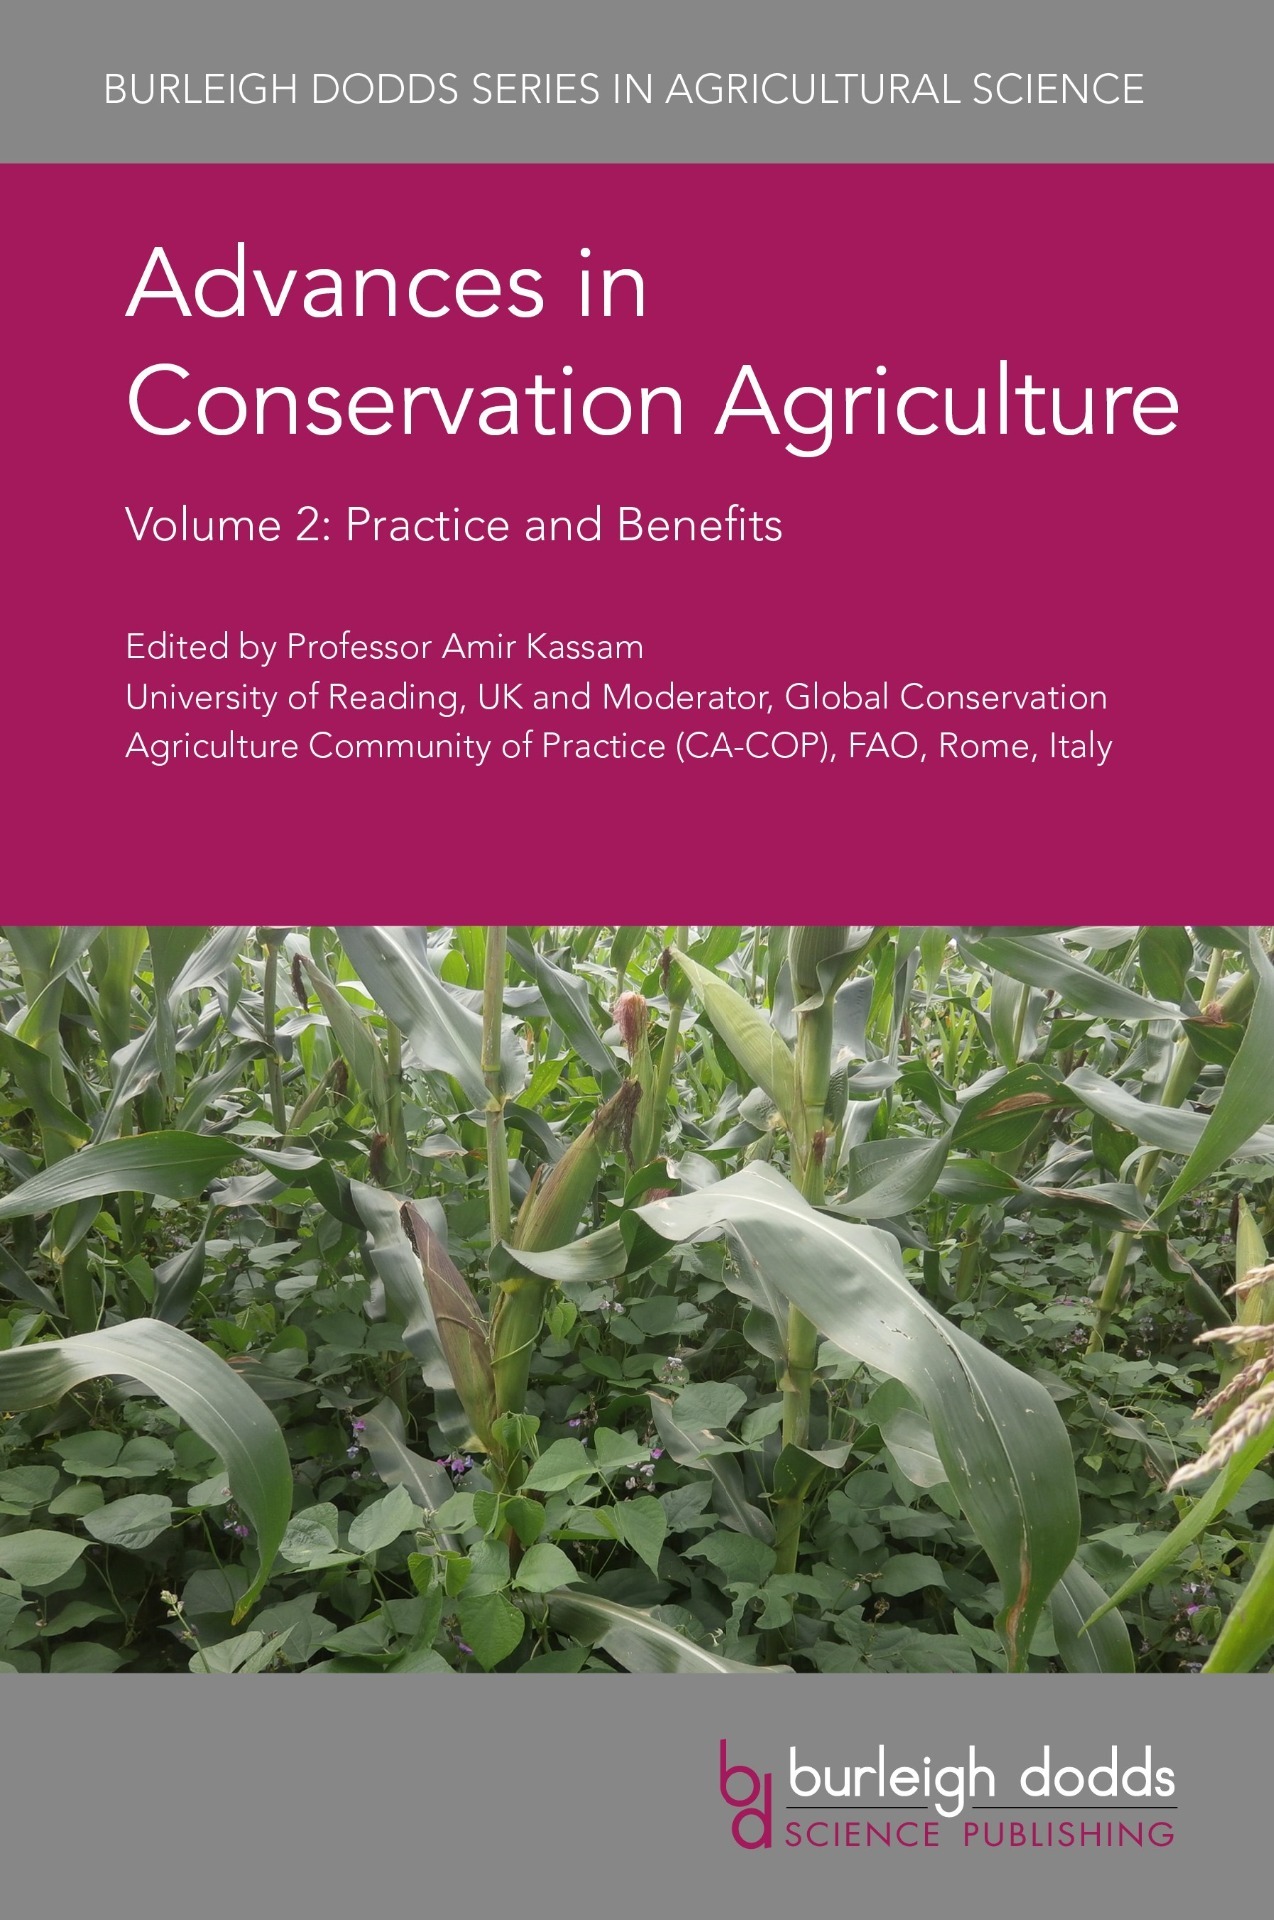 Advances in Conservation Agriculture - Volume 2: Practice and Benefits